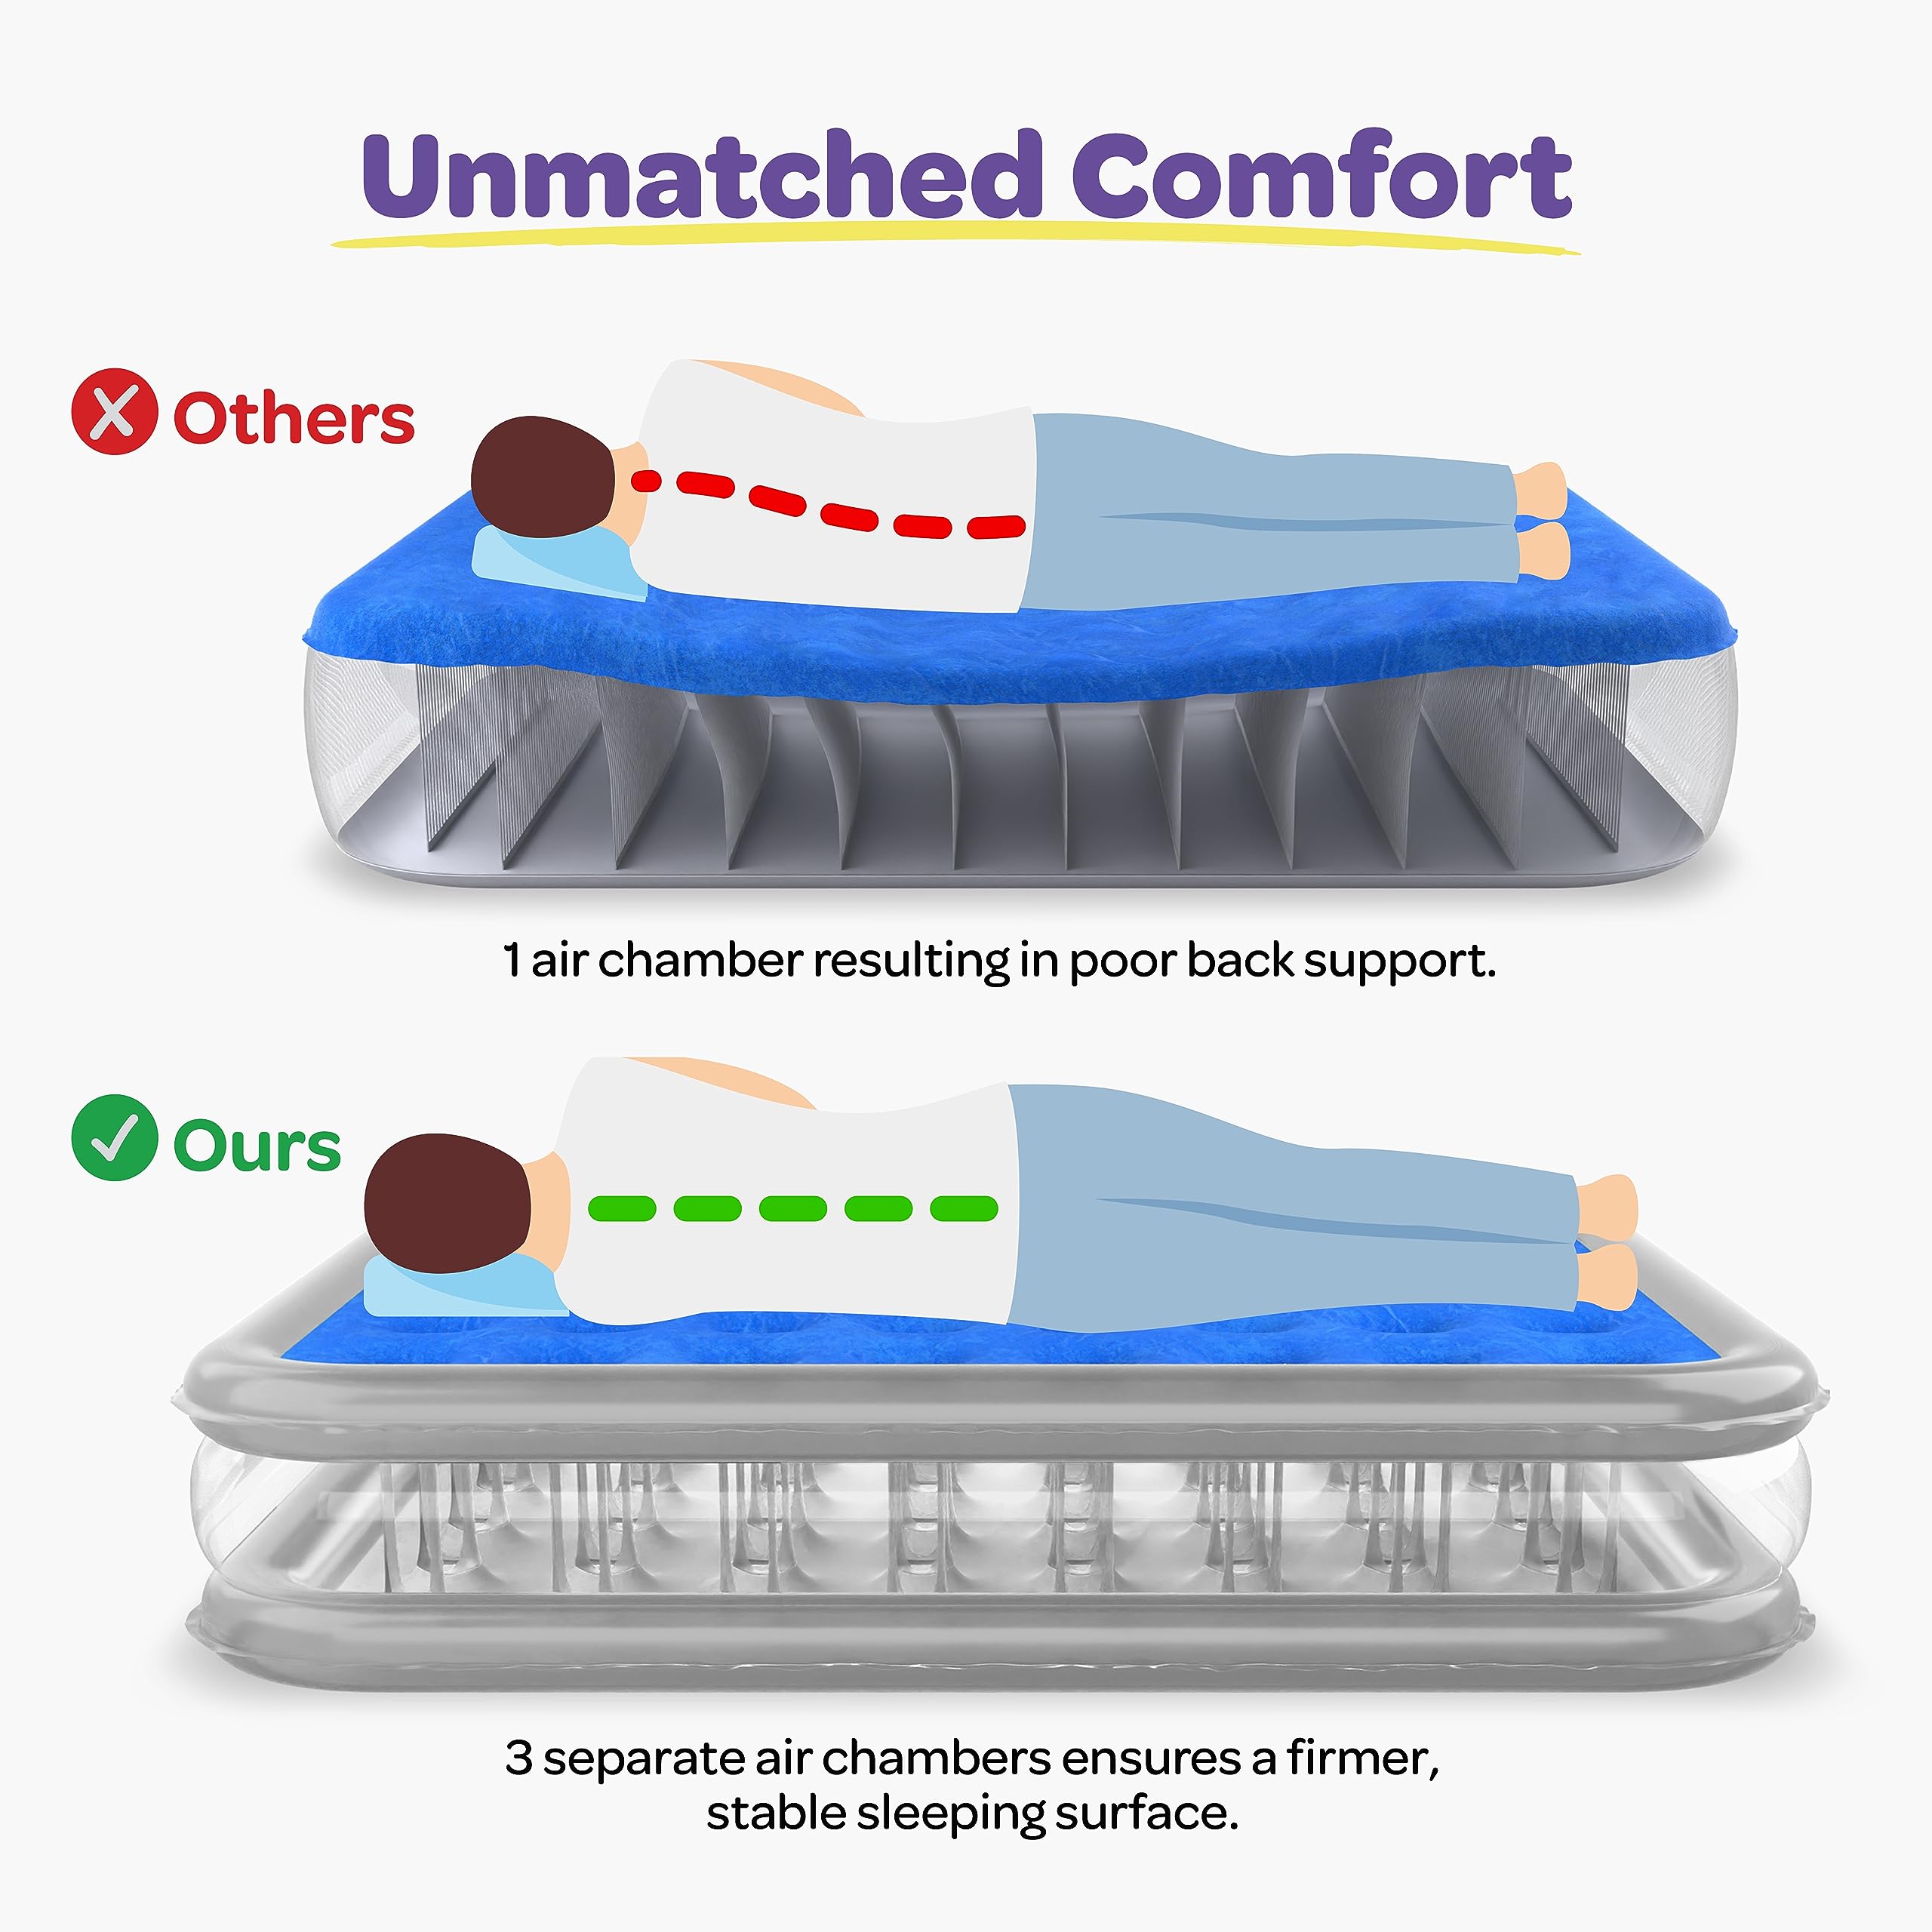 Air Mattress Queen Size, Luxury Air Mattress with Built in Pump, Plush Elevated with Comfort Coil Beam Technology - 18" Height Inflatable Mattress, Portable for Home/Camping/Guests (300Lb. Capacity)  - Like New